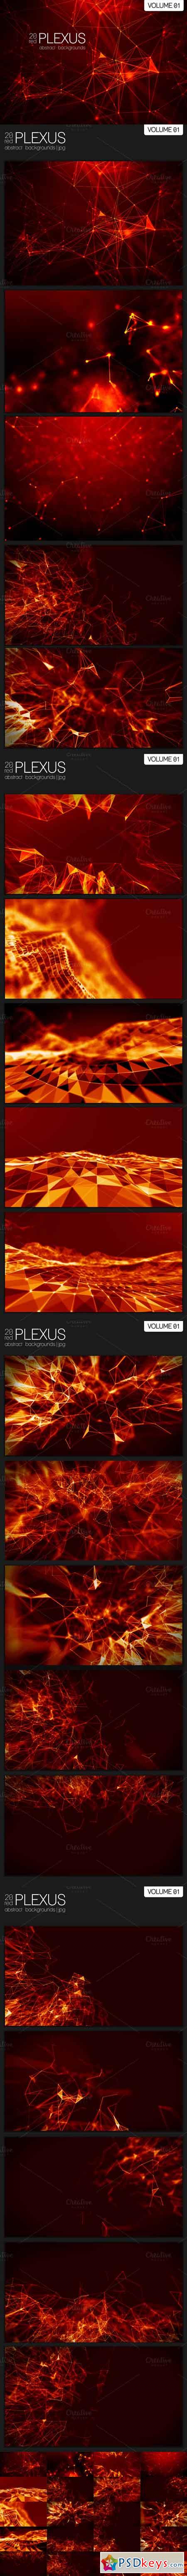 20 Red Abstract Plexus Backgrounds 682318